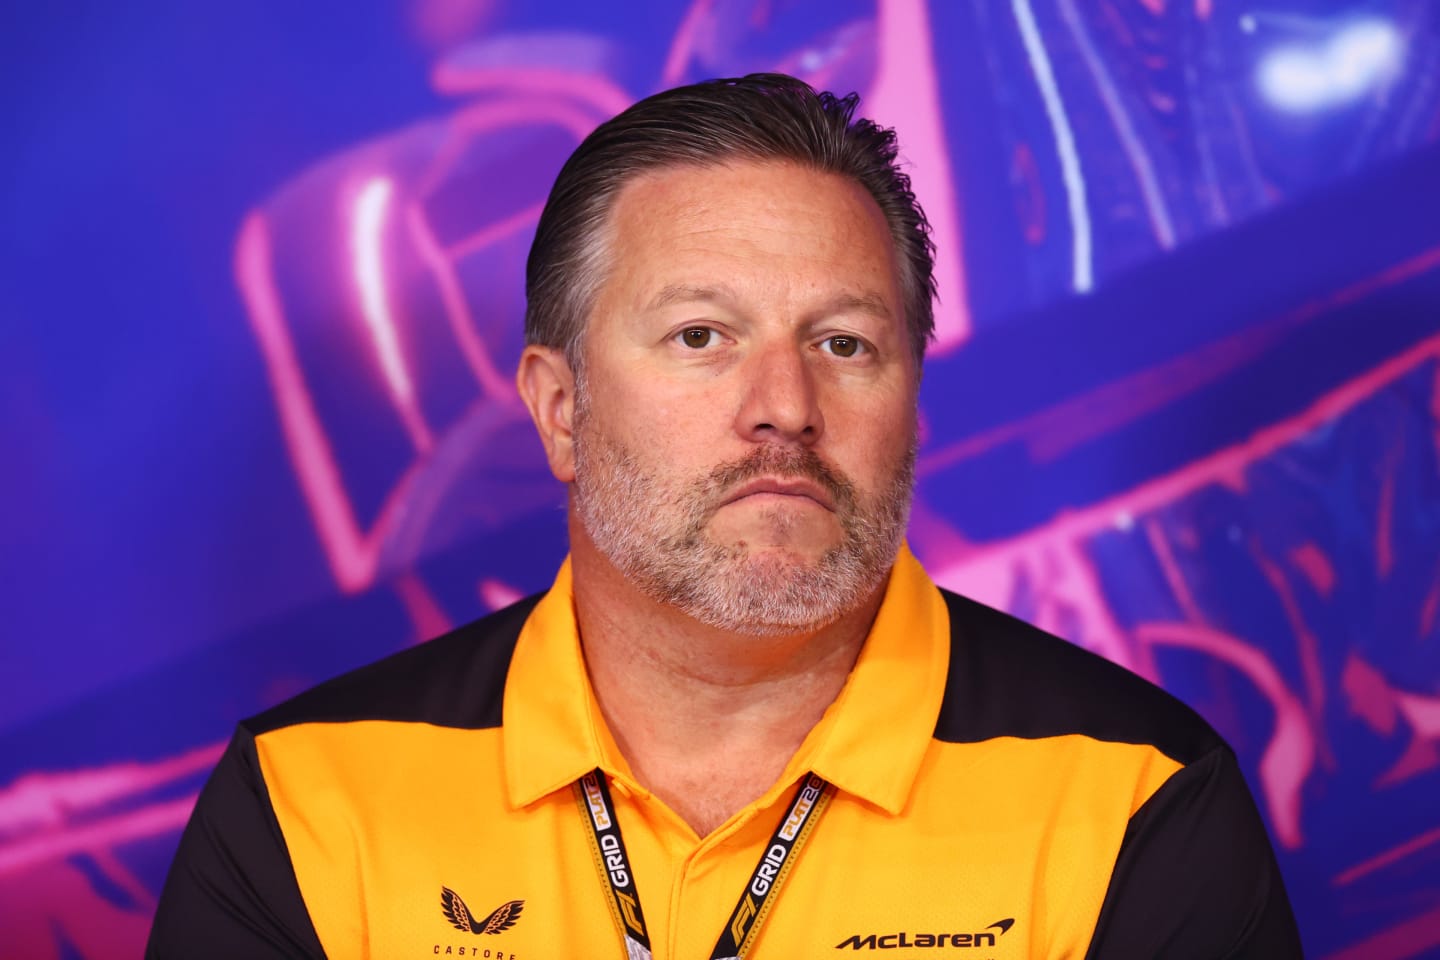 MONTREAL, QUEBEC - JUNE 18: McLaren Chief Executive Officer Zak Brown looks on in the Team Principals Press Conference prior to final practice ahead of the F1 Grand Prix of Canada at Circuit Gilles Villeneuve on June 18, 2022 in Montreal, Quebec. (Photo by Dan Istitene/Getty Images)